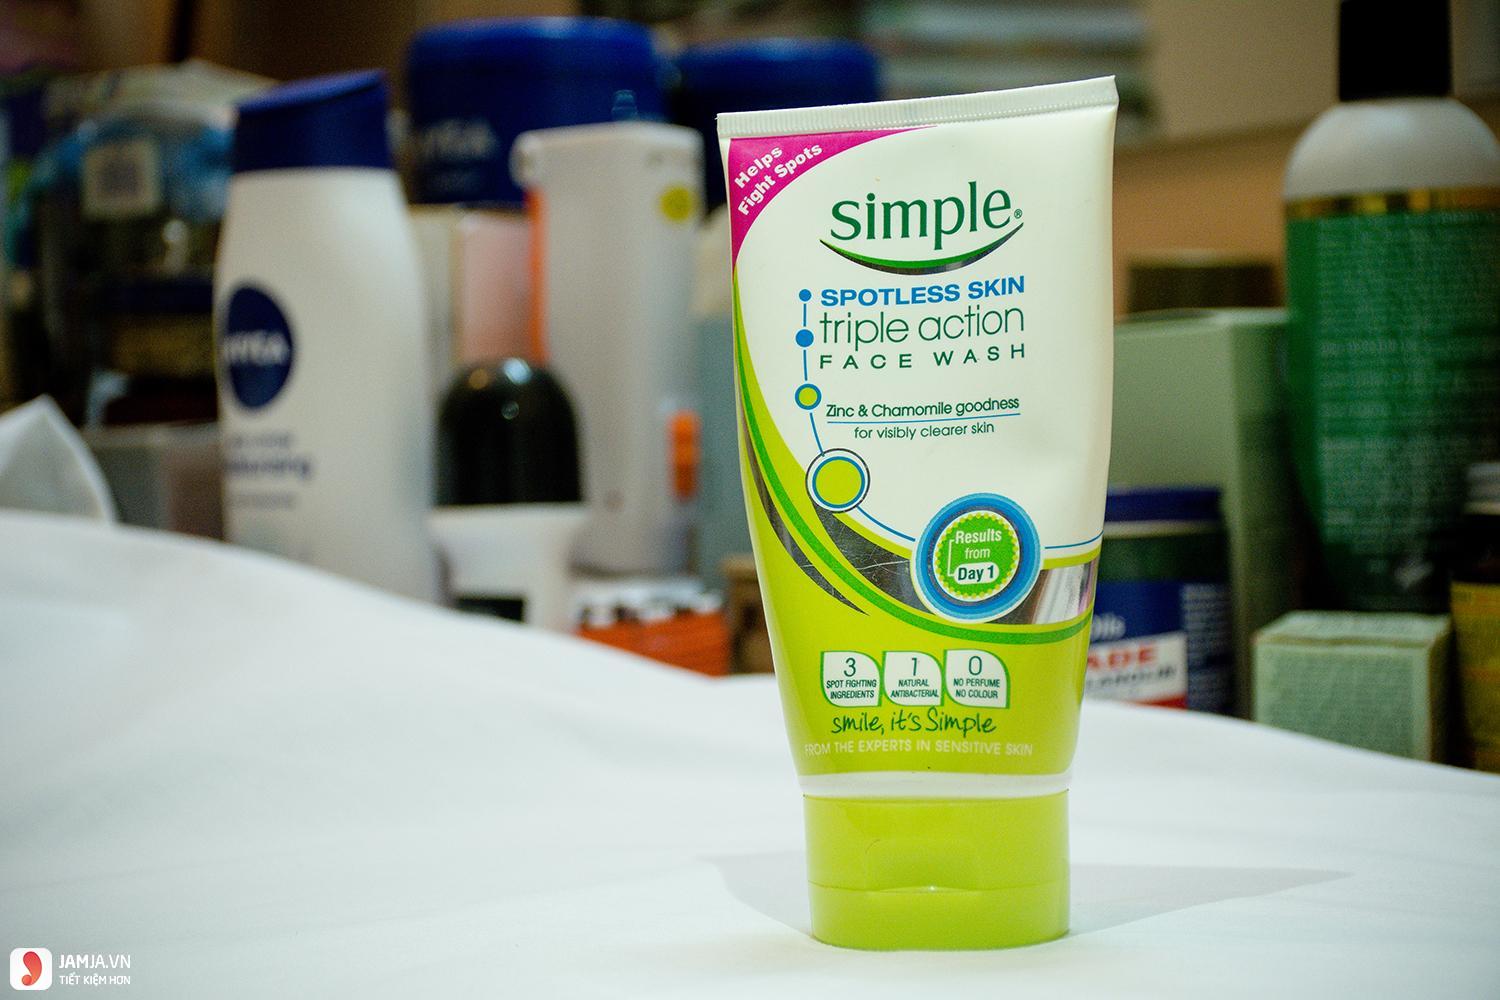 Simple spotless skin triple action face wash 1